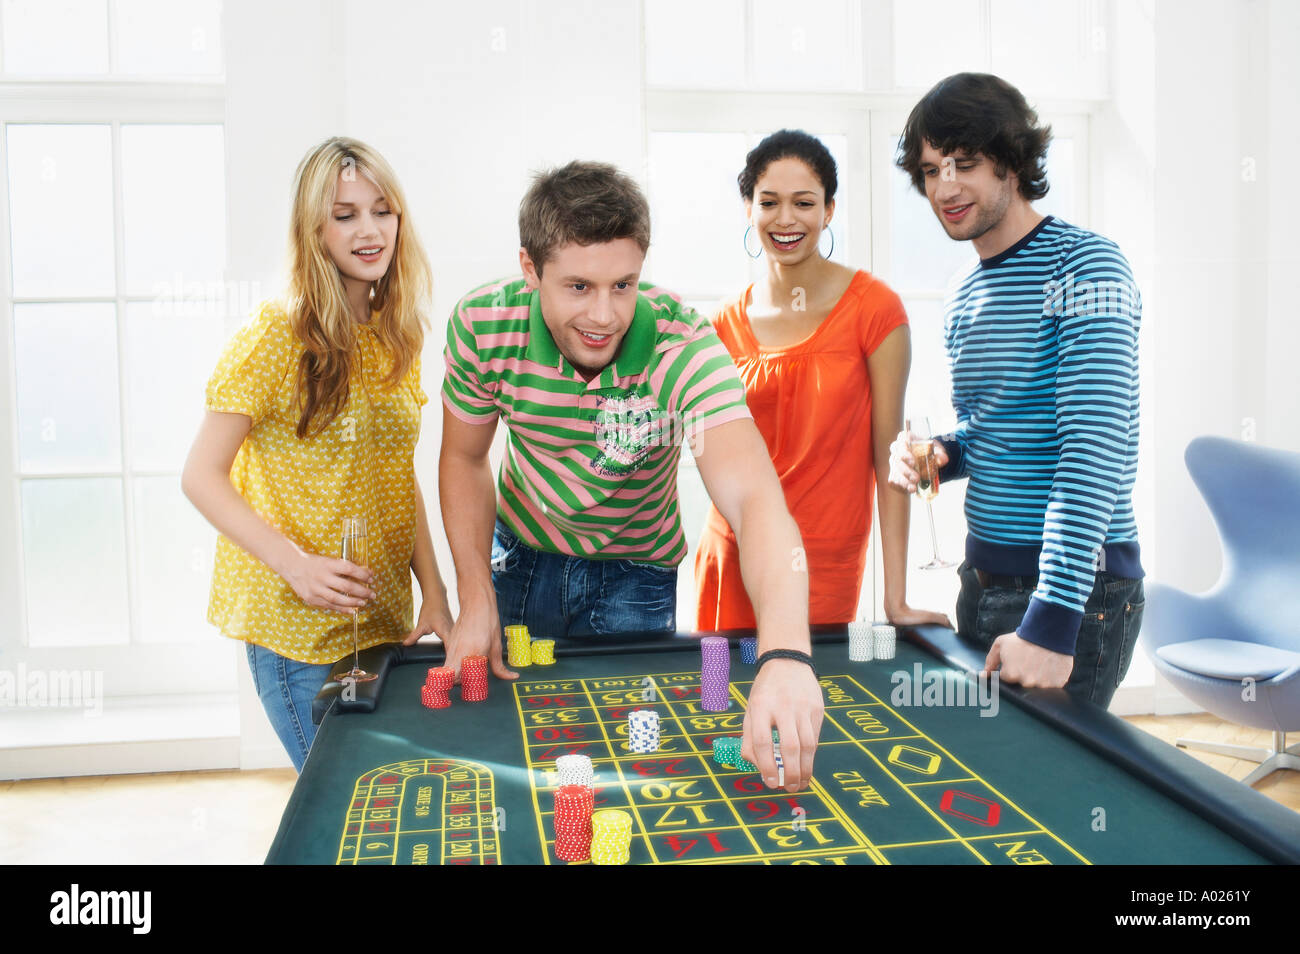 Friends Gambling on roulette table Stock Photo